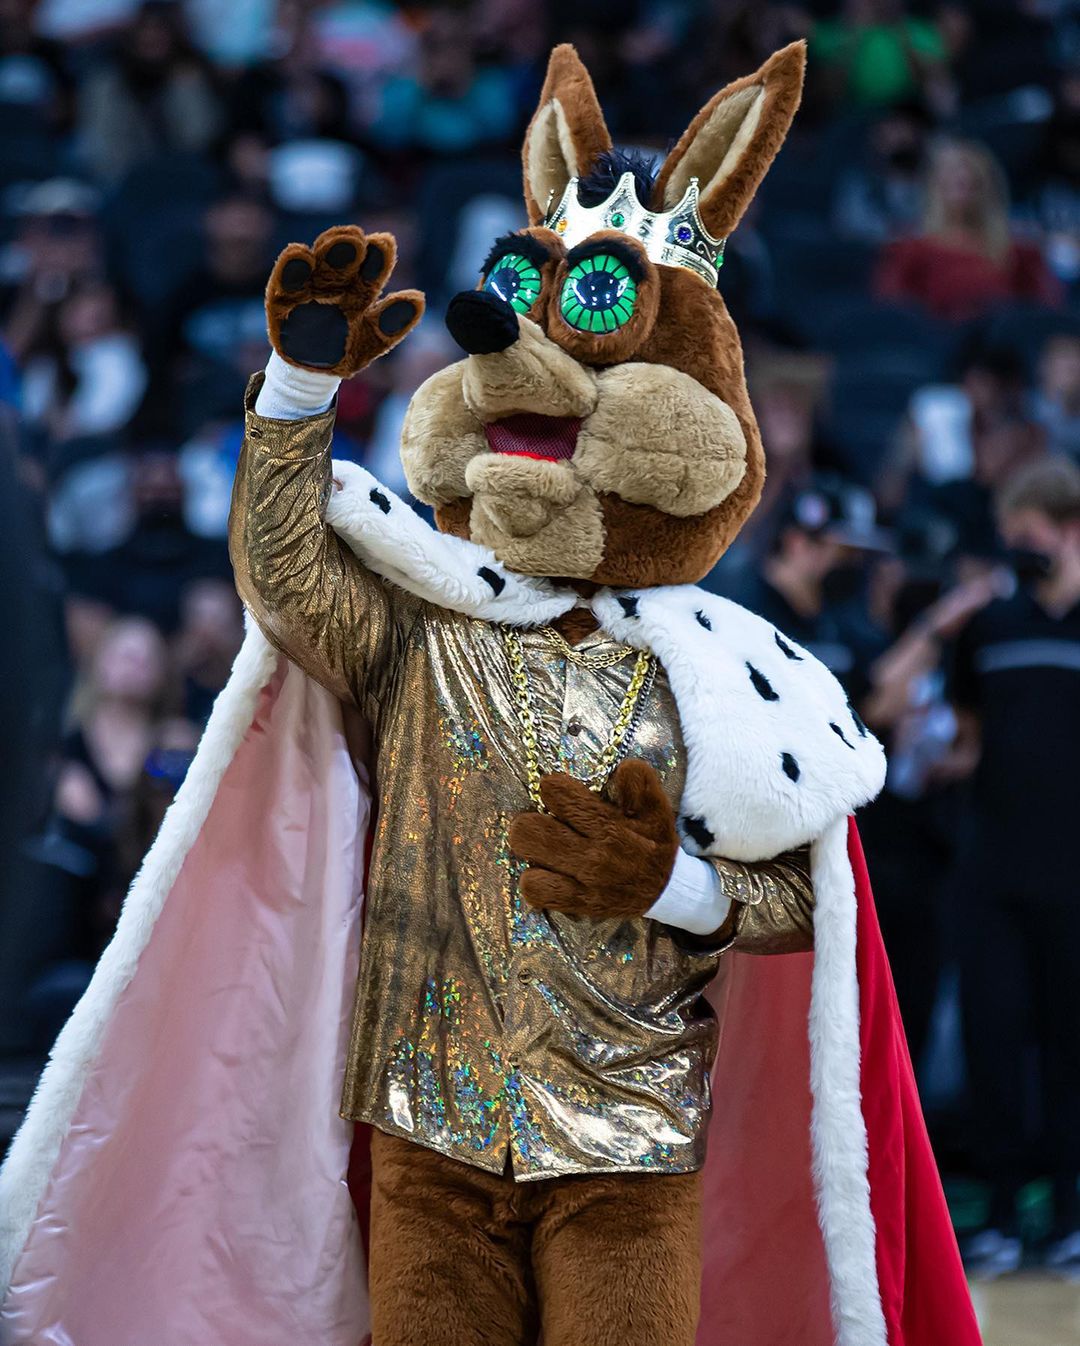 Wishing a happy #NationalMascotDay to the one and only @spurscoyote!  Love you f...